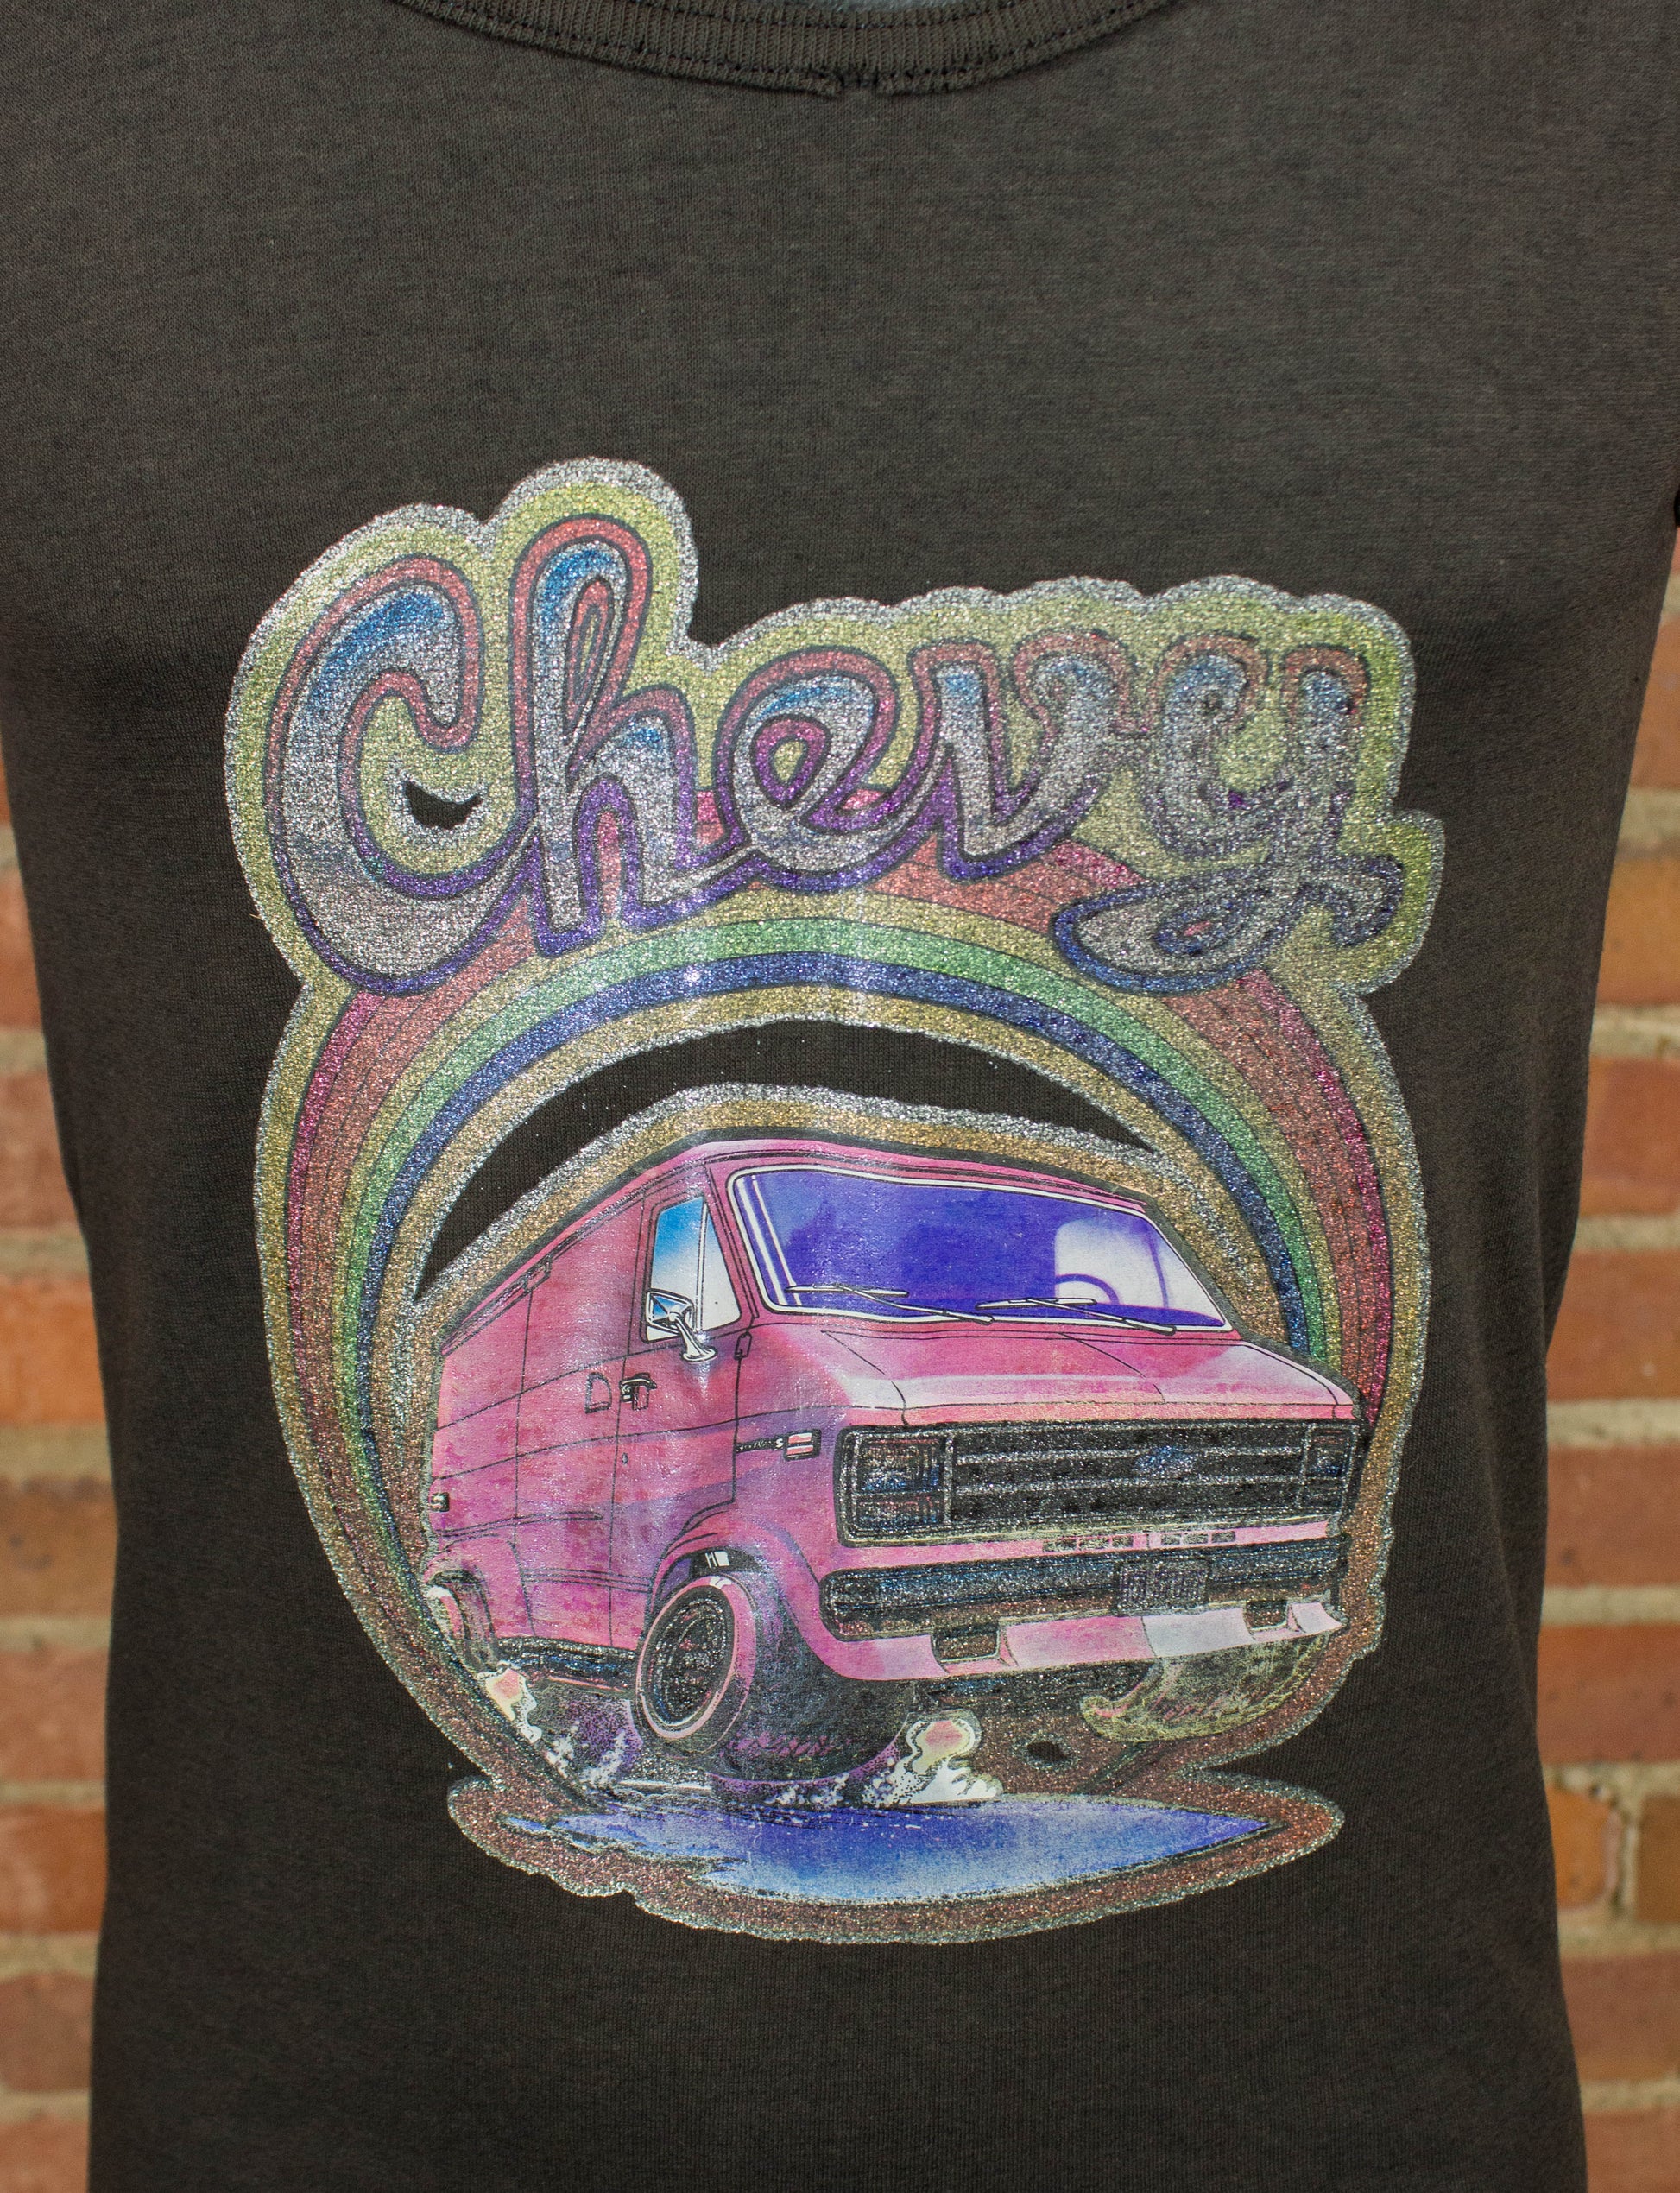 Vintage Chevy Van Iron On Graphic Tank Top Black and Rainbow Glitter Small